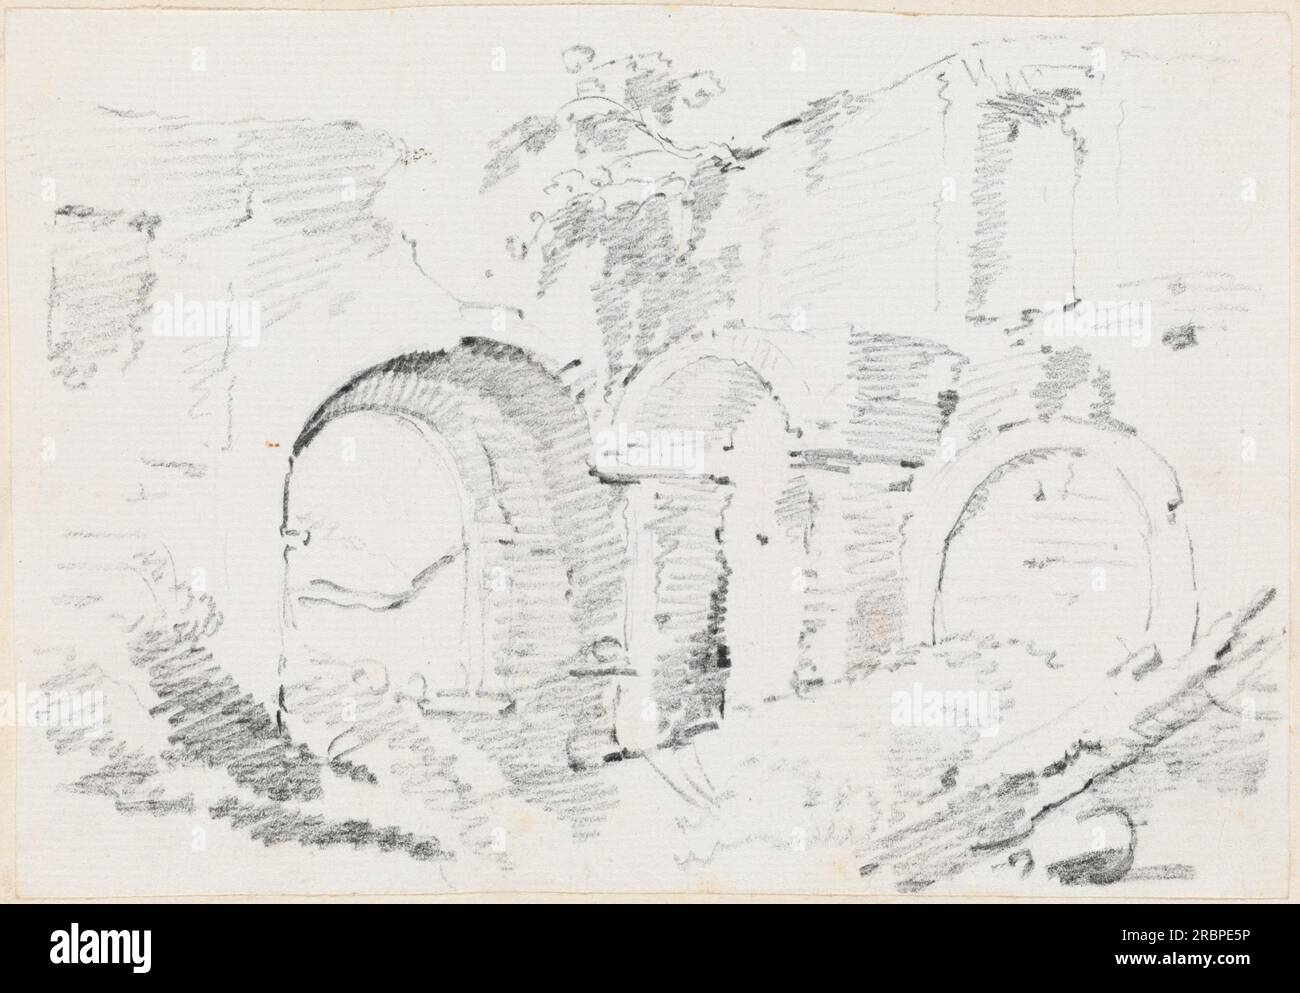 'Joseph-Marie Vien, Roman Walls, 1744/1750, graphite on laid paper, sheet: 12.9 x 18.5 cm (5 1/16 x 7 5/16 in.) page size: 42.5 x 27.7 cm (16 3/4 x 10 7/8 in.), Mark J. Millard Architectural Collection, 1983.49.165' Stock Photo